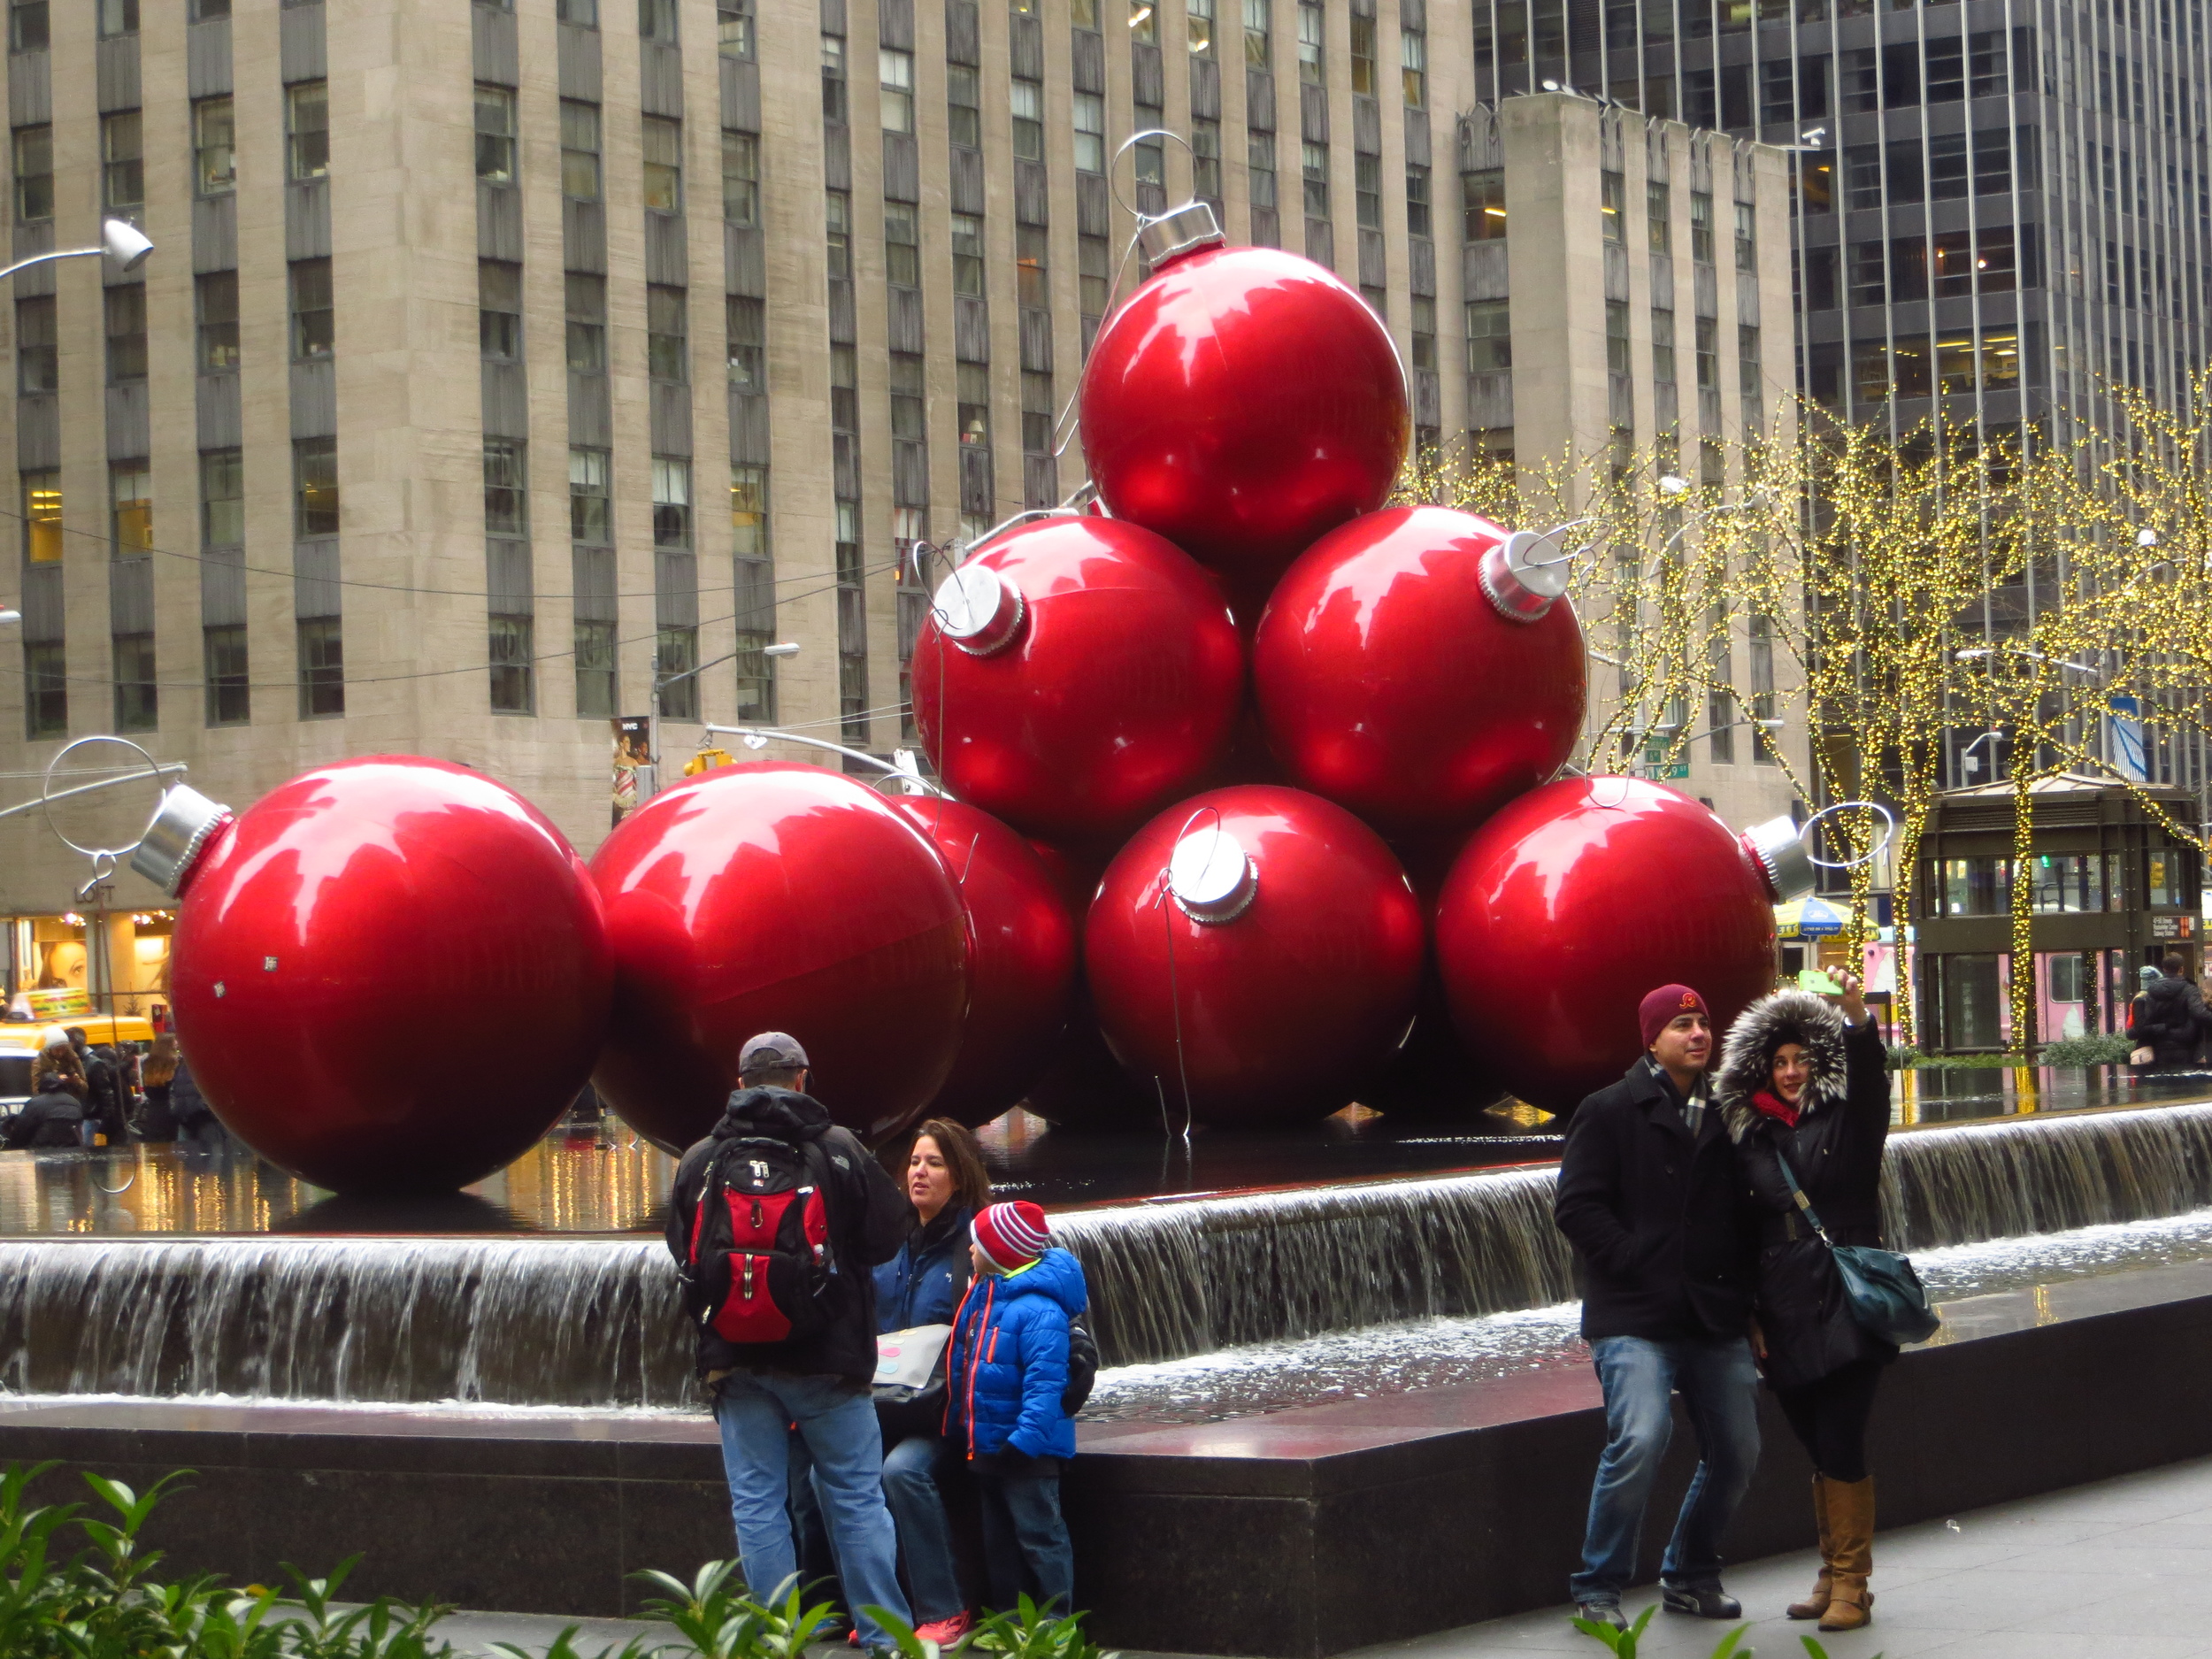 Giant ornaments